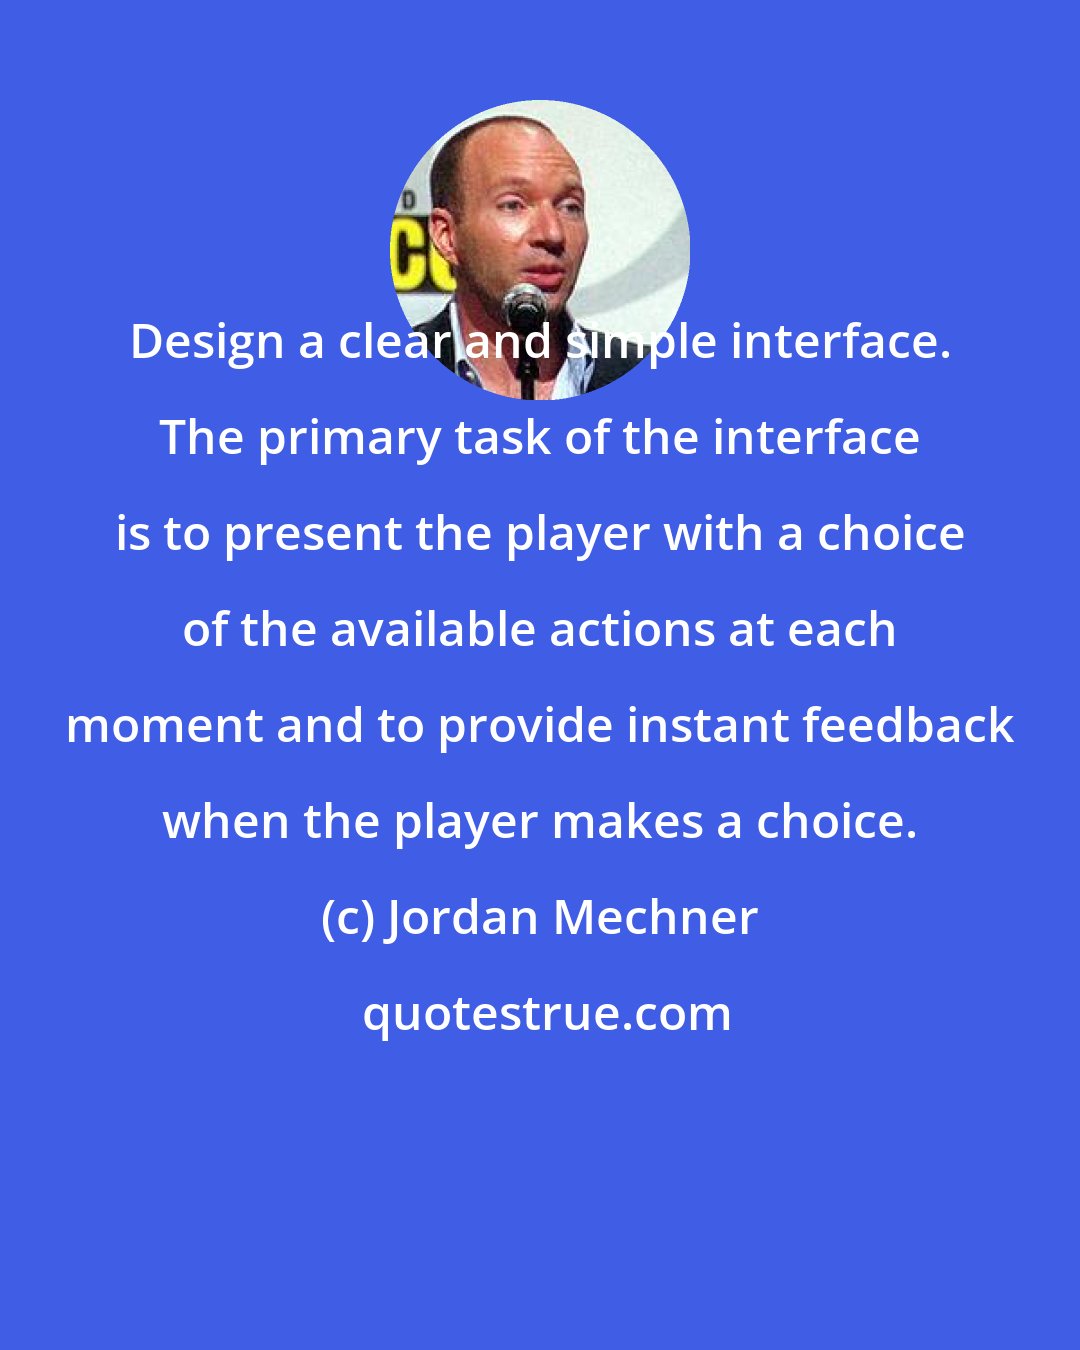 Jordan Mechner: Design a clear and simple interface. The primary task of the interface is to present the player with a choice of the available actions at each moment and to provide instant feedback when the player makes a choice.